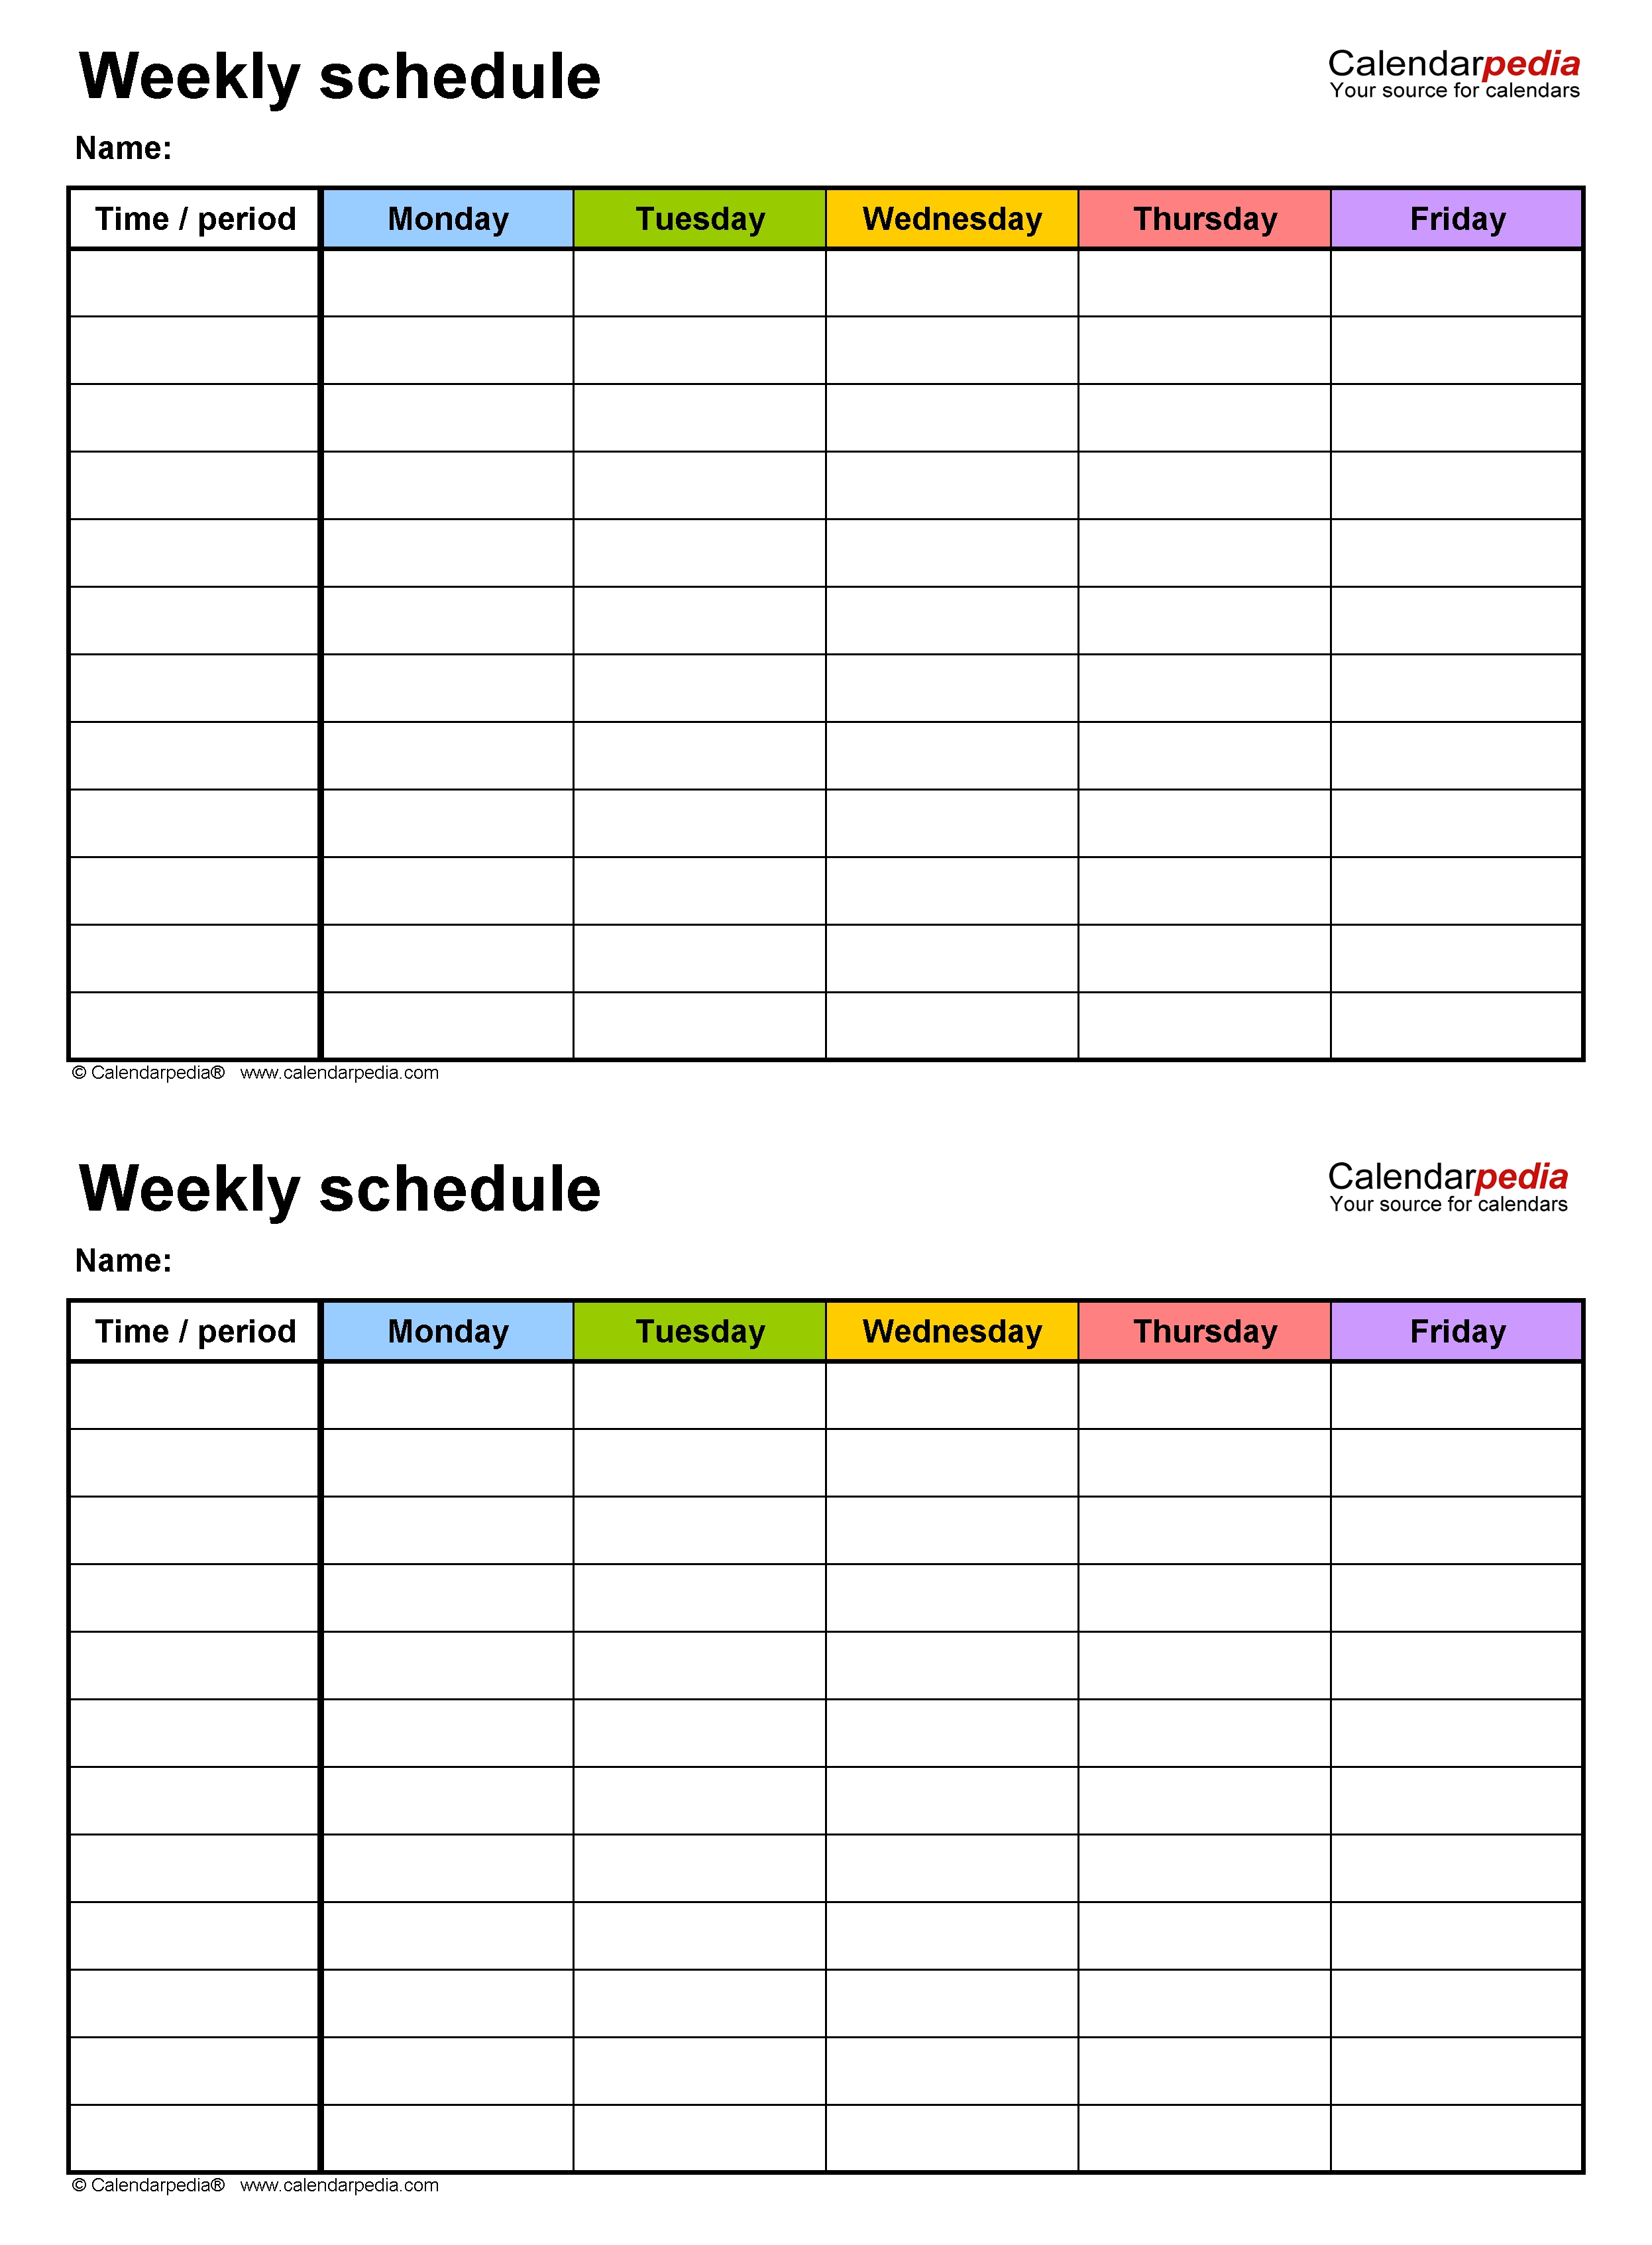 Free Weekly Schedule Templates For Excel - 18 Templates  Free Daily Schedule Template Excel